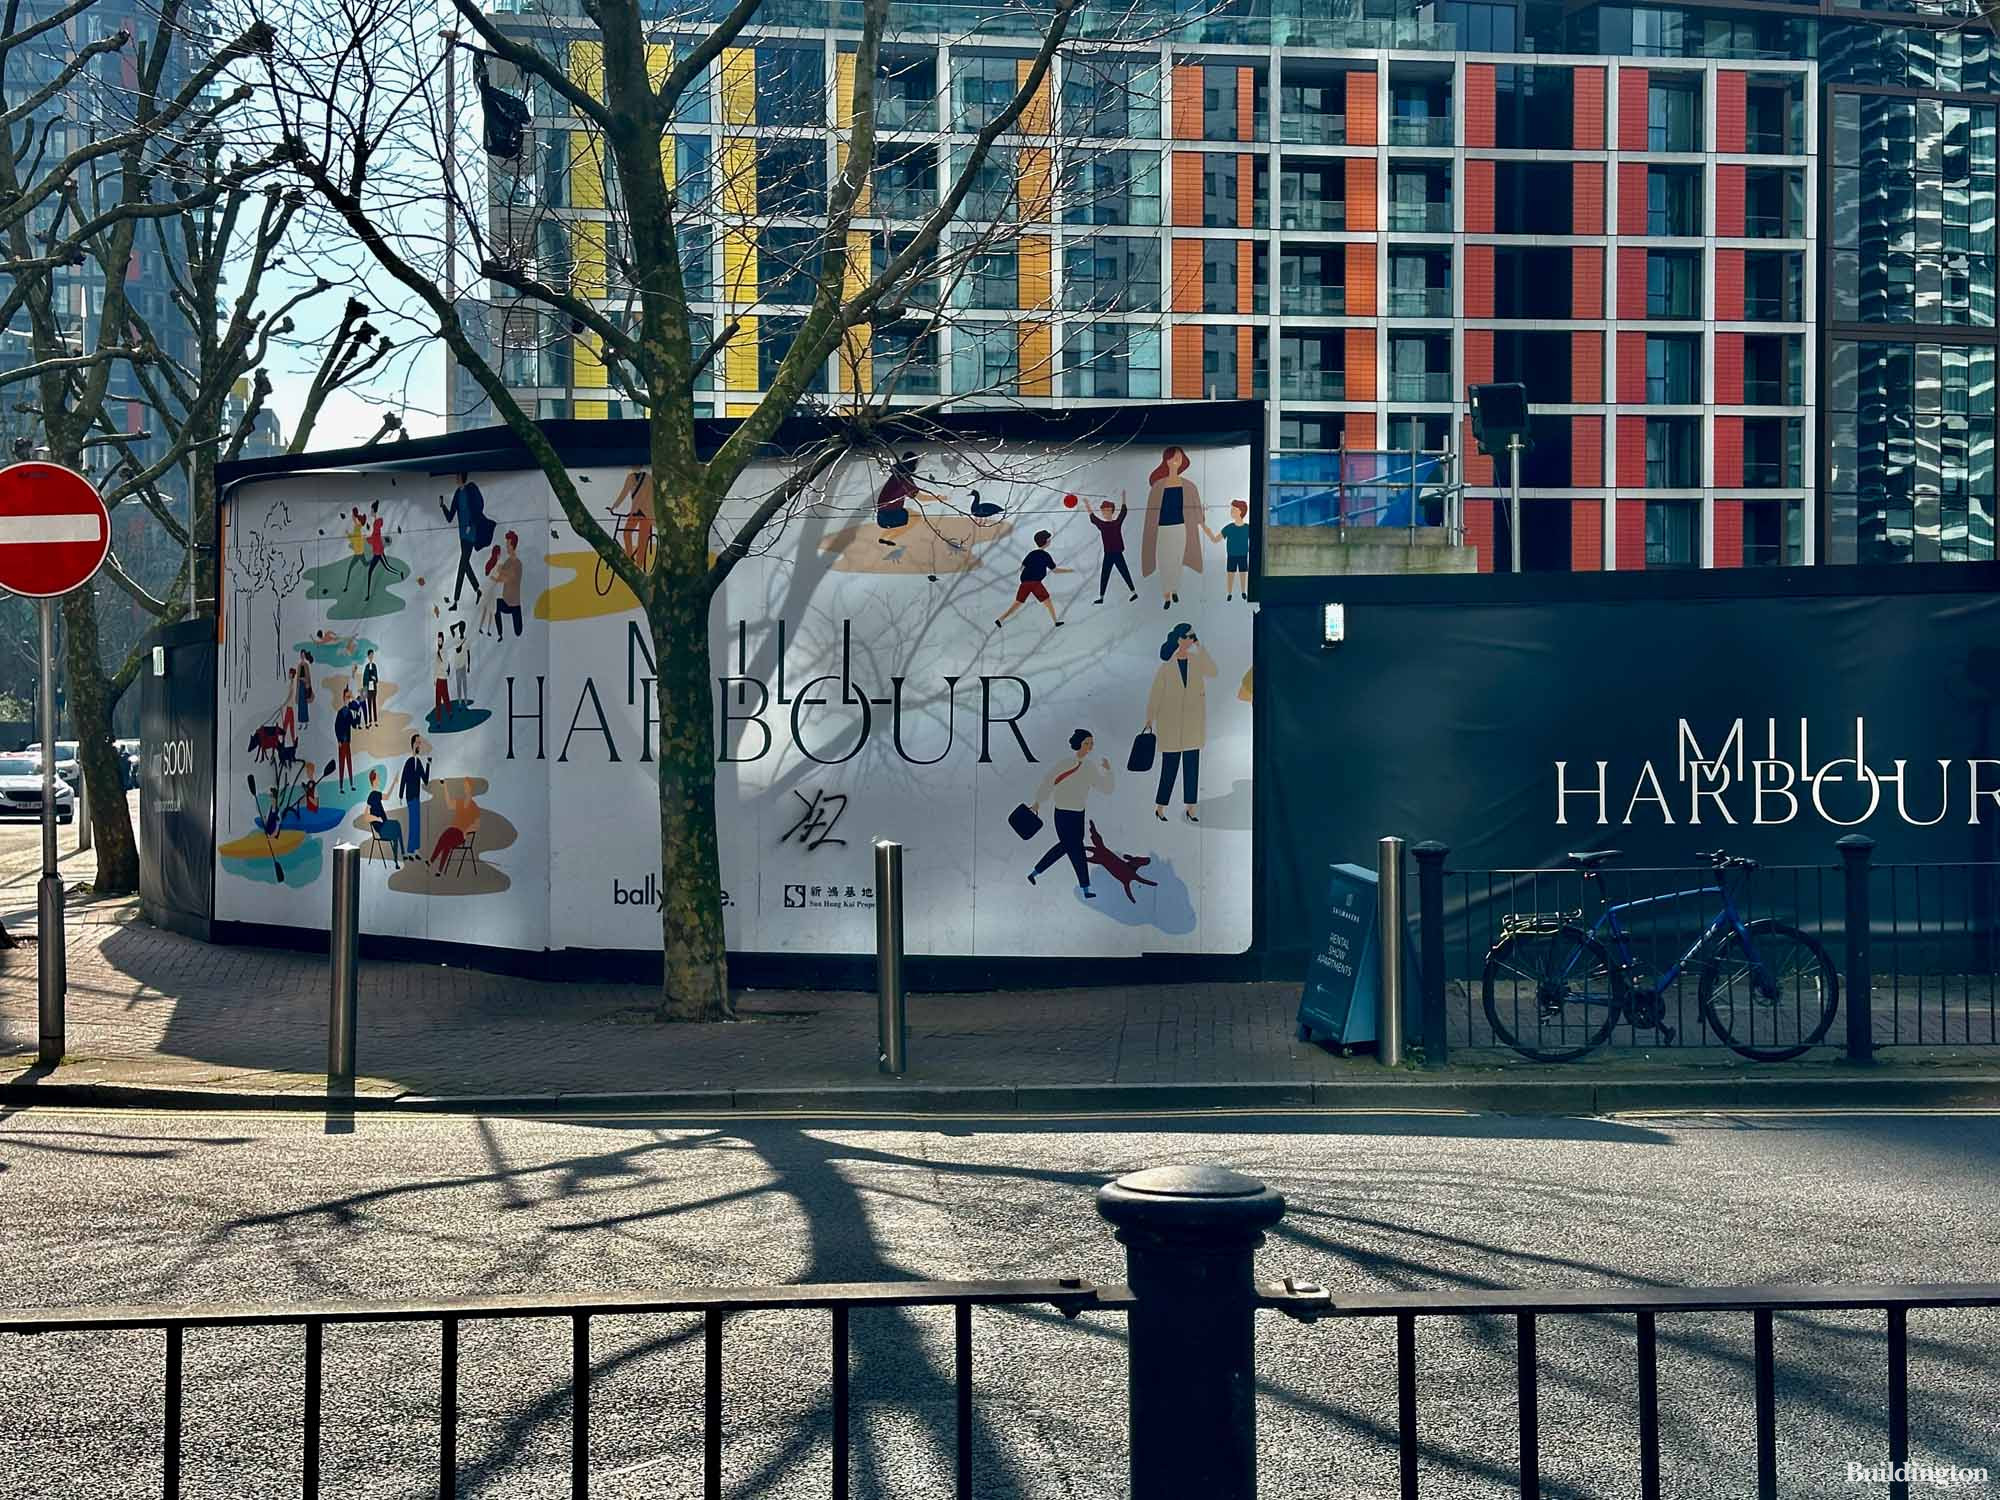 Mill Harbour hoarding on the corner of Millharbour and Marsh Wall on the Isle of Dogs in London E14.